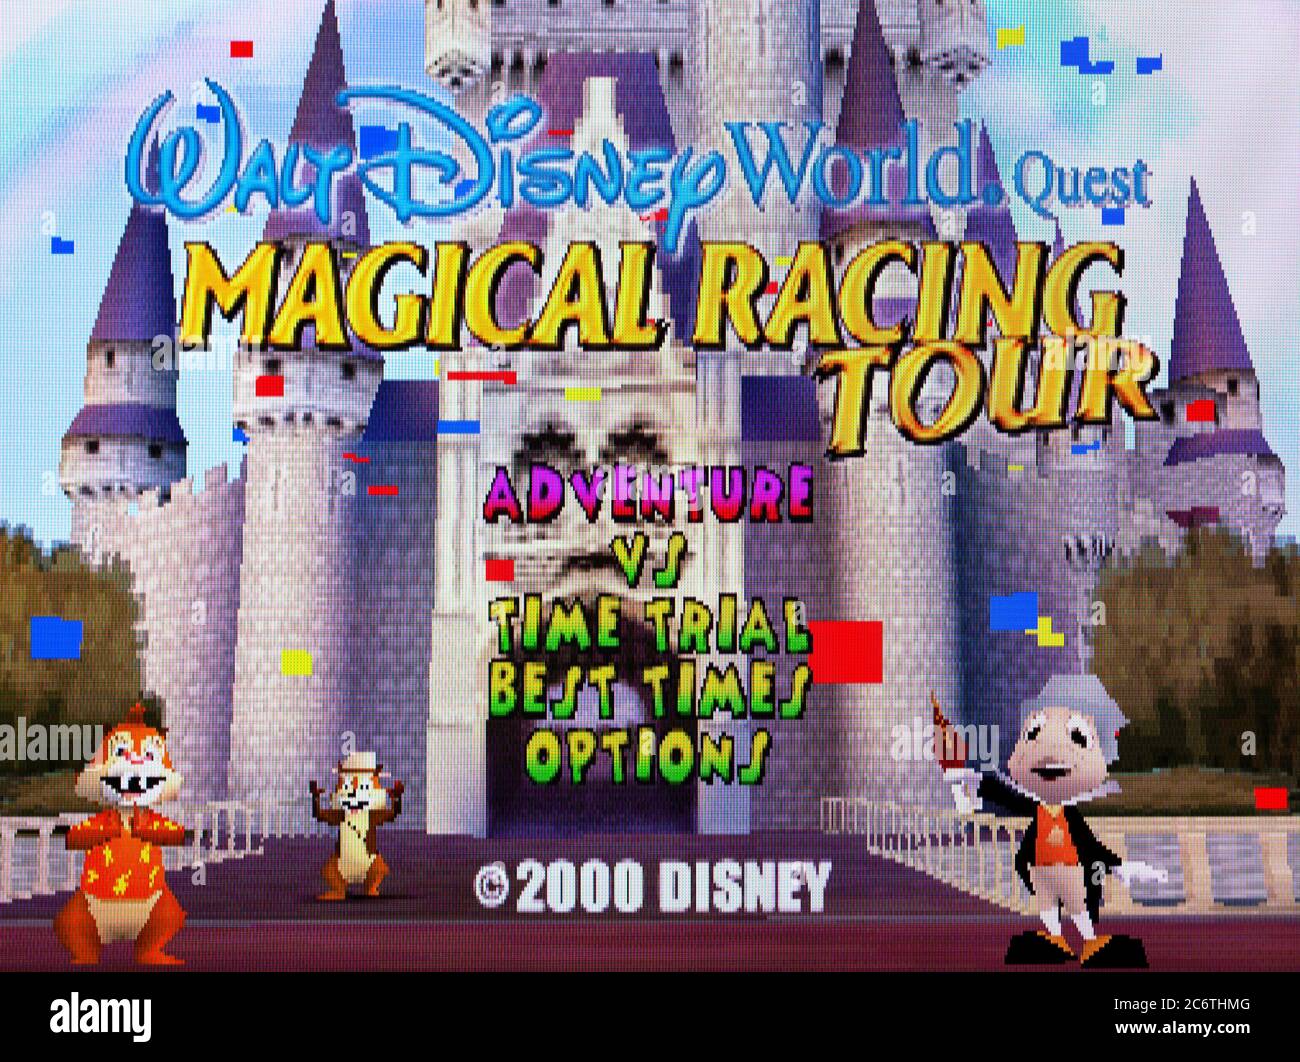 Walt Disney World Quest Magical Racing Tour - Sony Playstation 1 PS1 PSX - Editorial use only Stock Photo